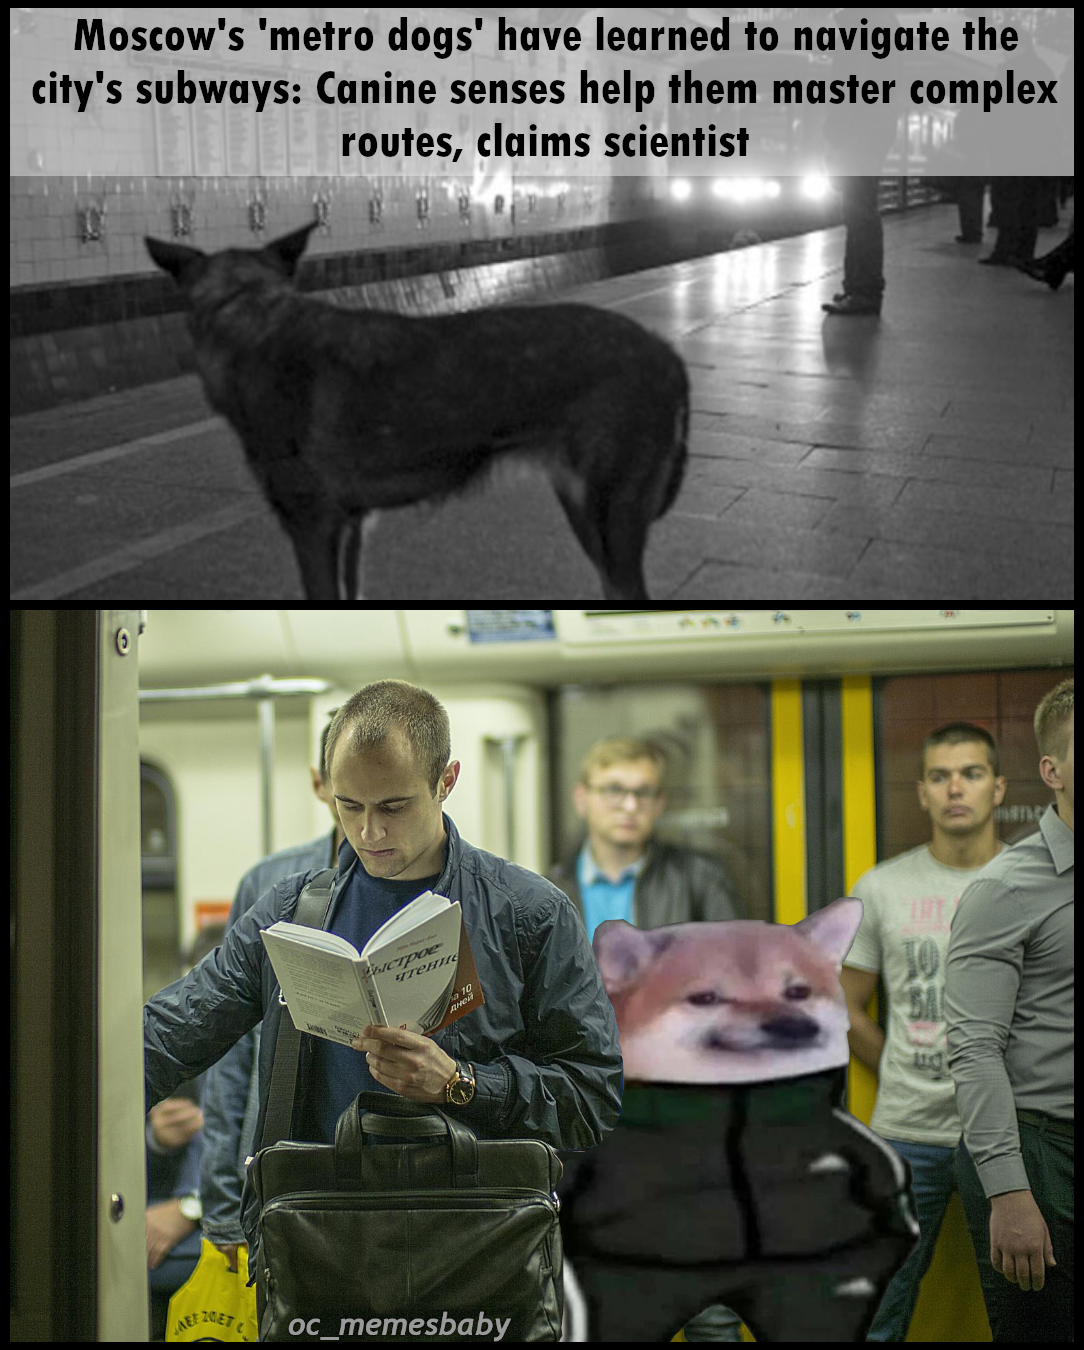 photo caption - Moscow's 'metro dogs' have learned to navigate the city's subways Canine senses help them master complex routes, claims scientist oc_memesbaby